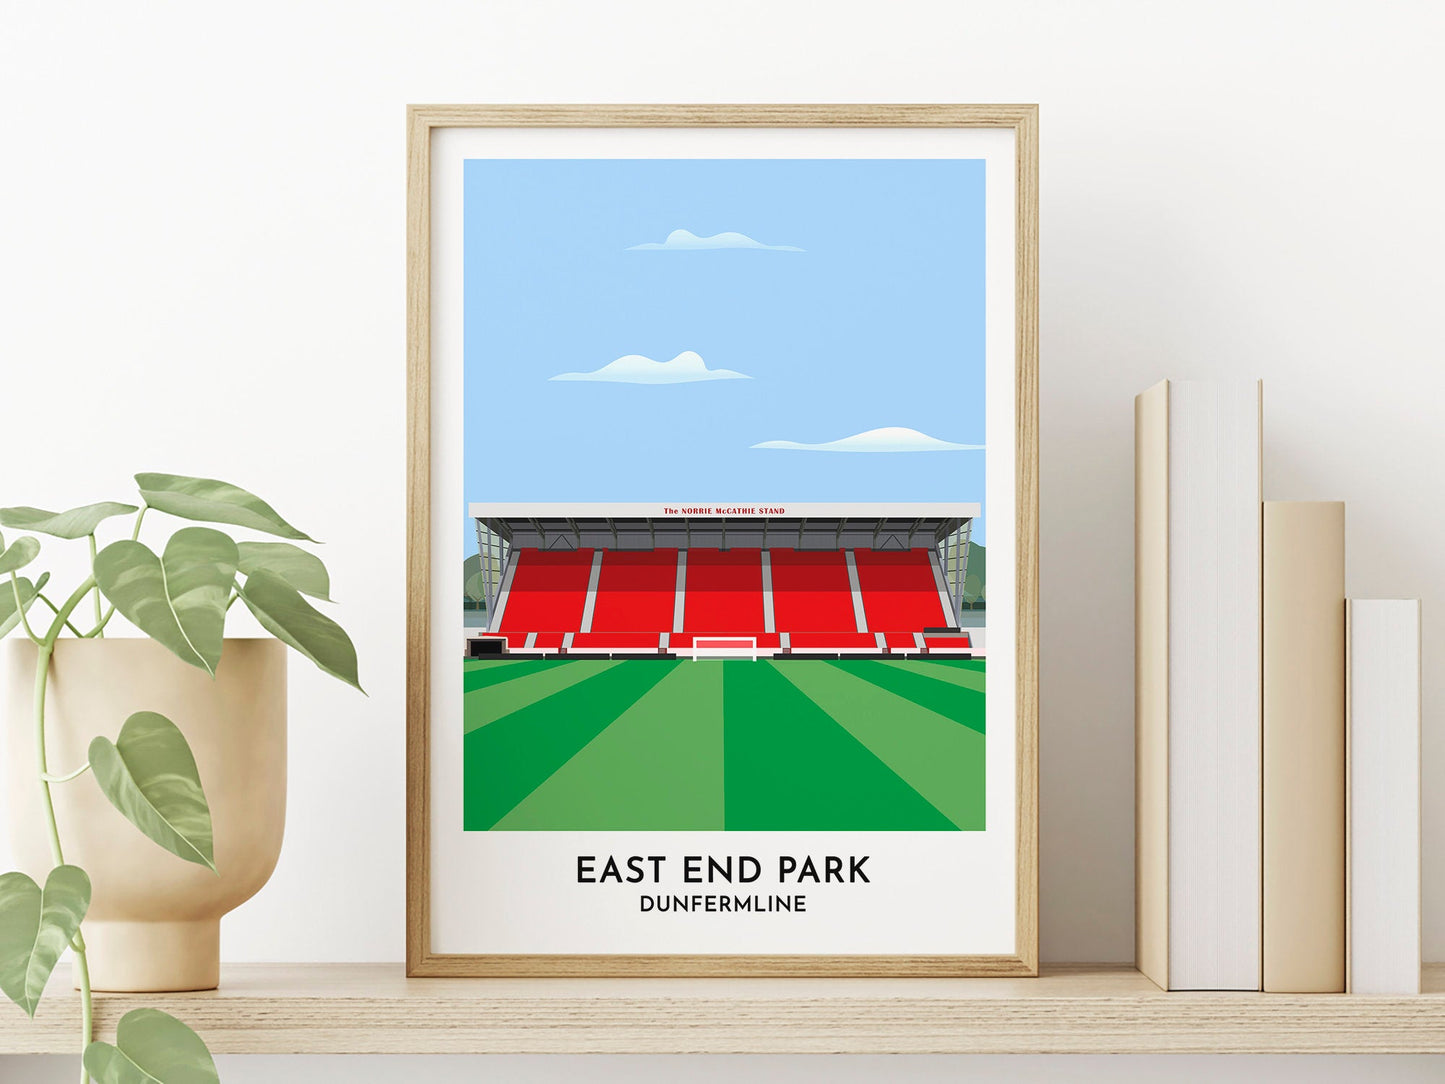 Dunfermline Athletic Art Poster, East End Park KDM Group Football Stadium Illustration, Best Gifts for 30th 40th 50th 60th Birthday - Turf Football Art